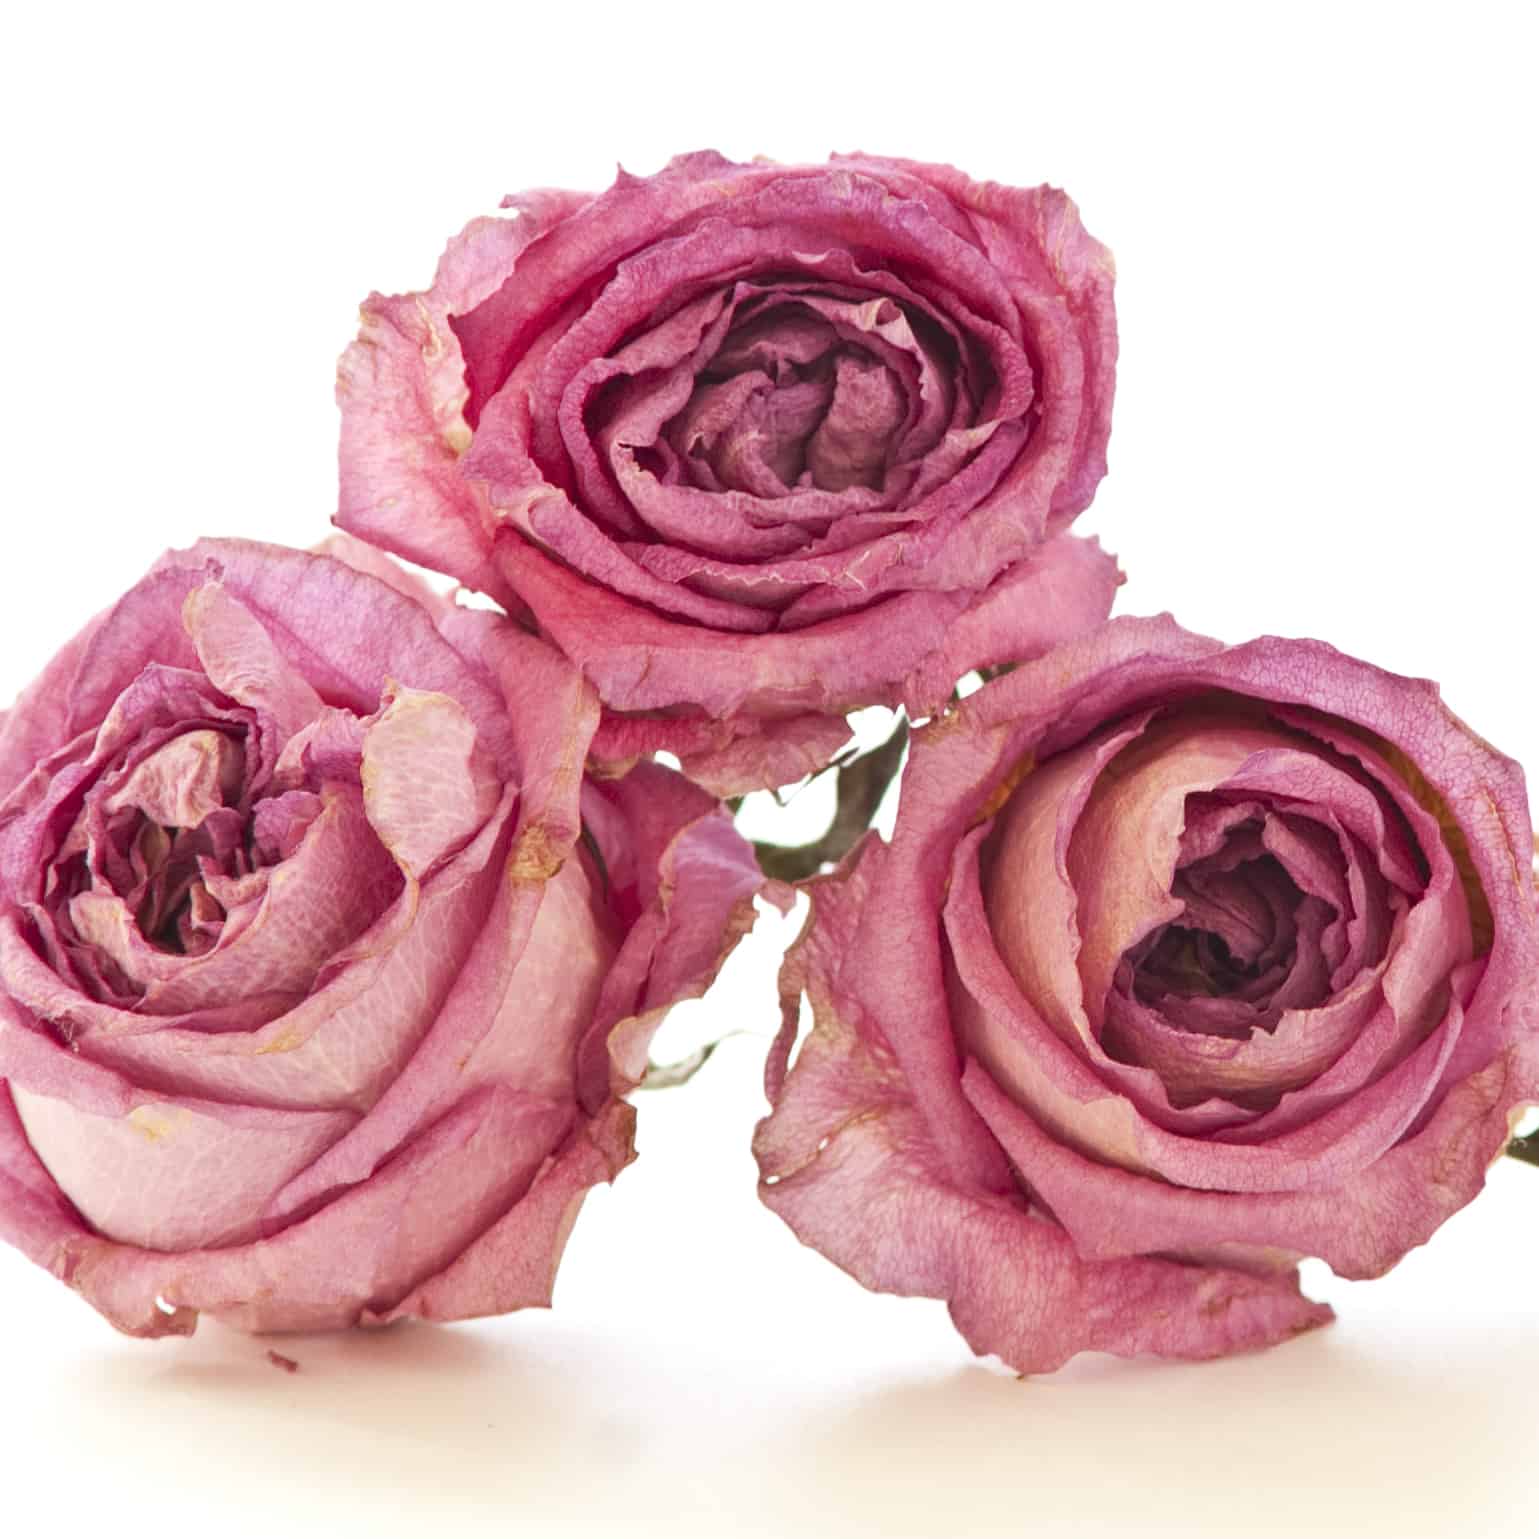 Know the Rose, Naturally Dried Flowers